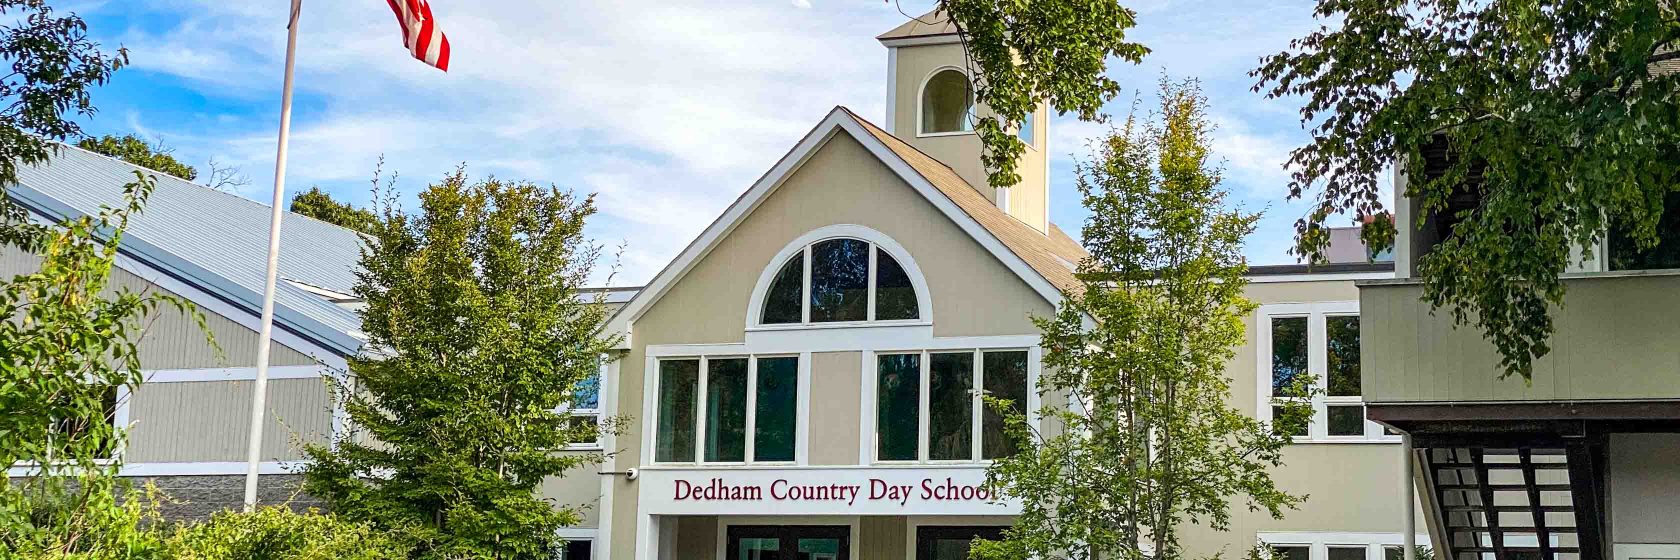 An exterior view of the main building on Dedham Country Day School campus.